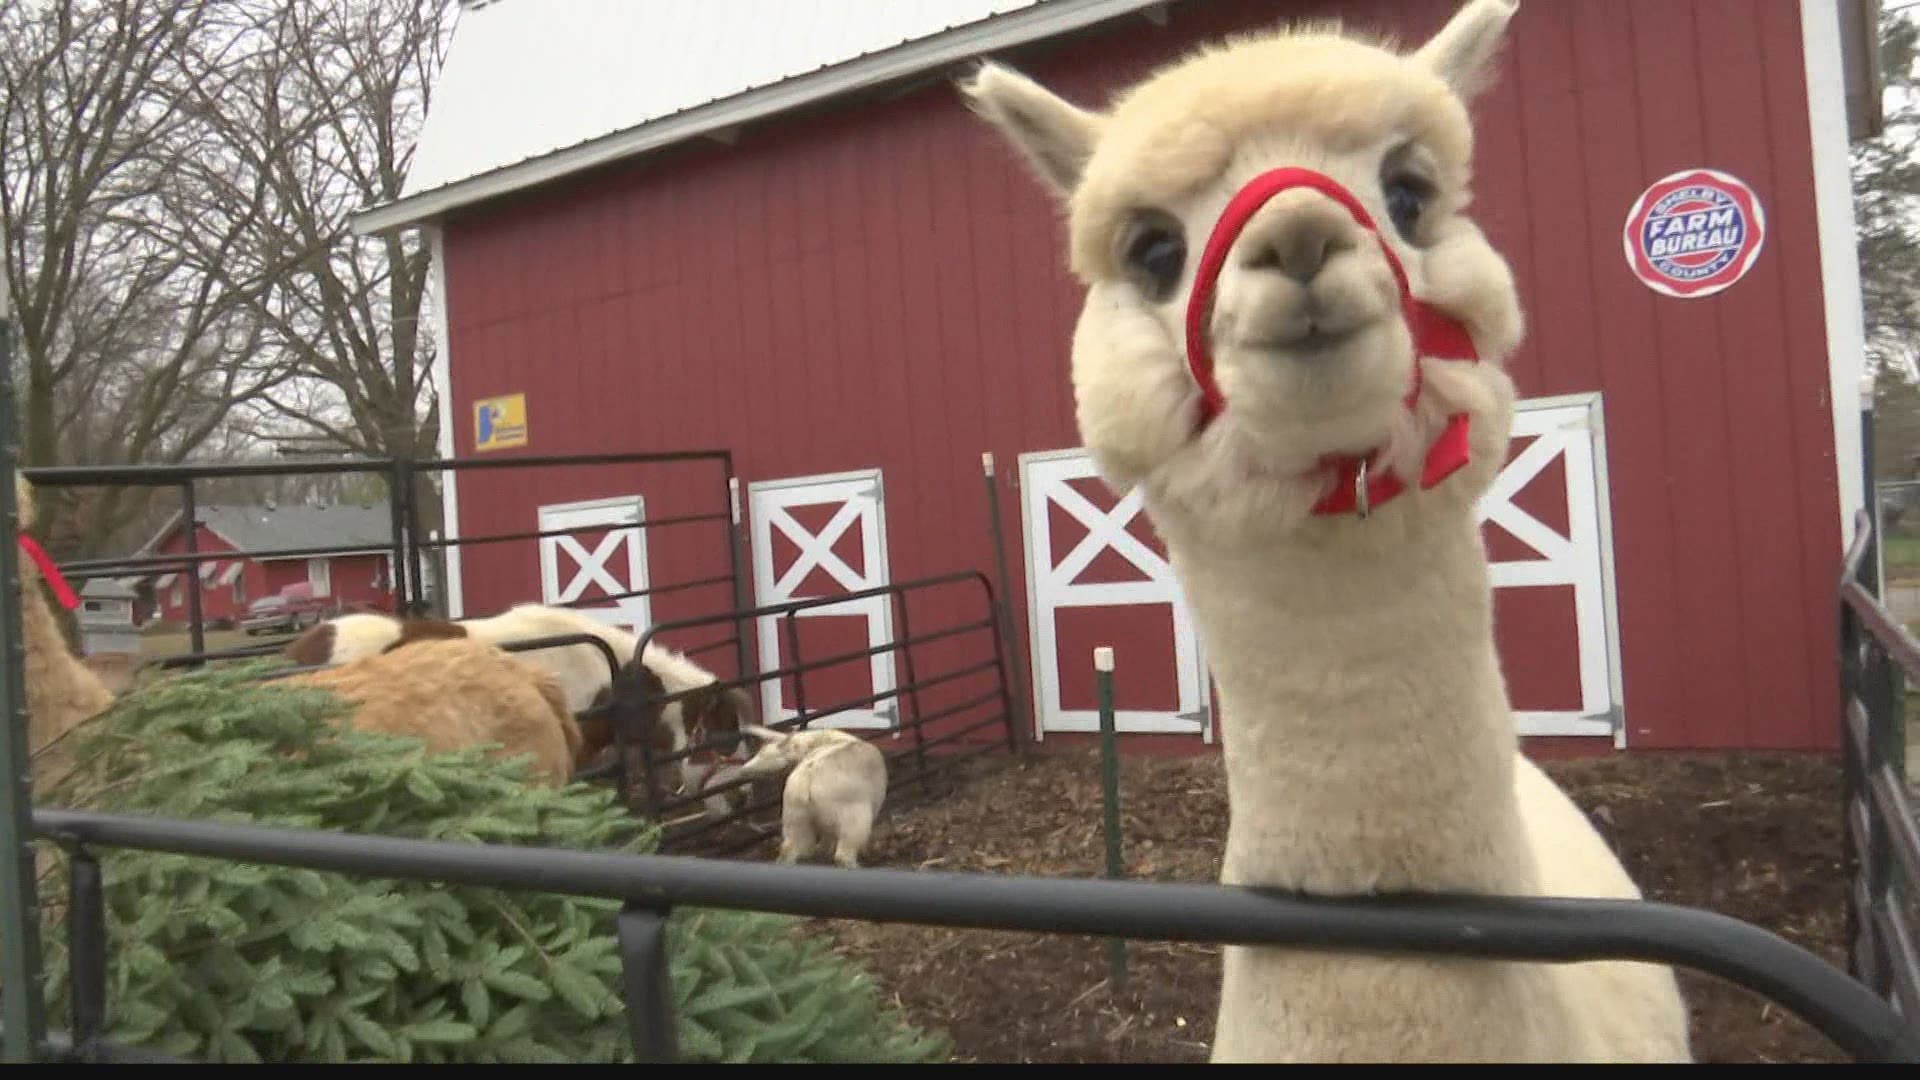 Shelby County mobile petting zoo hopes for wild expansion in 2021 